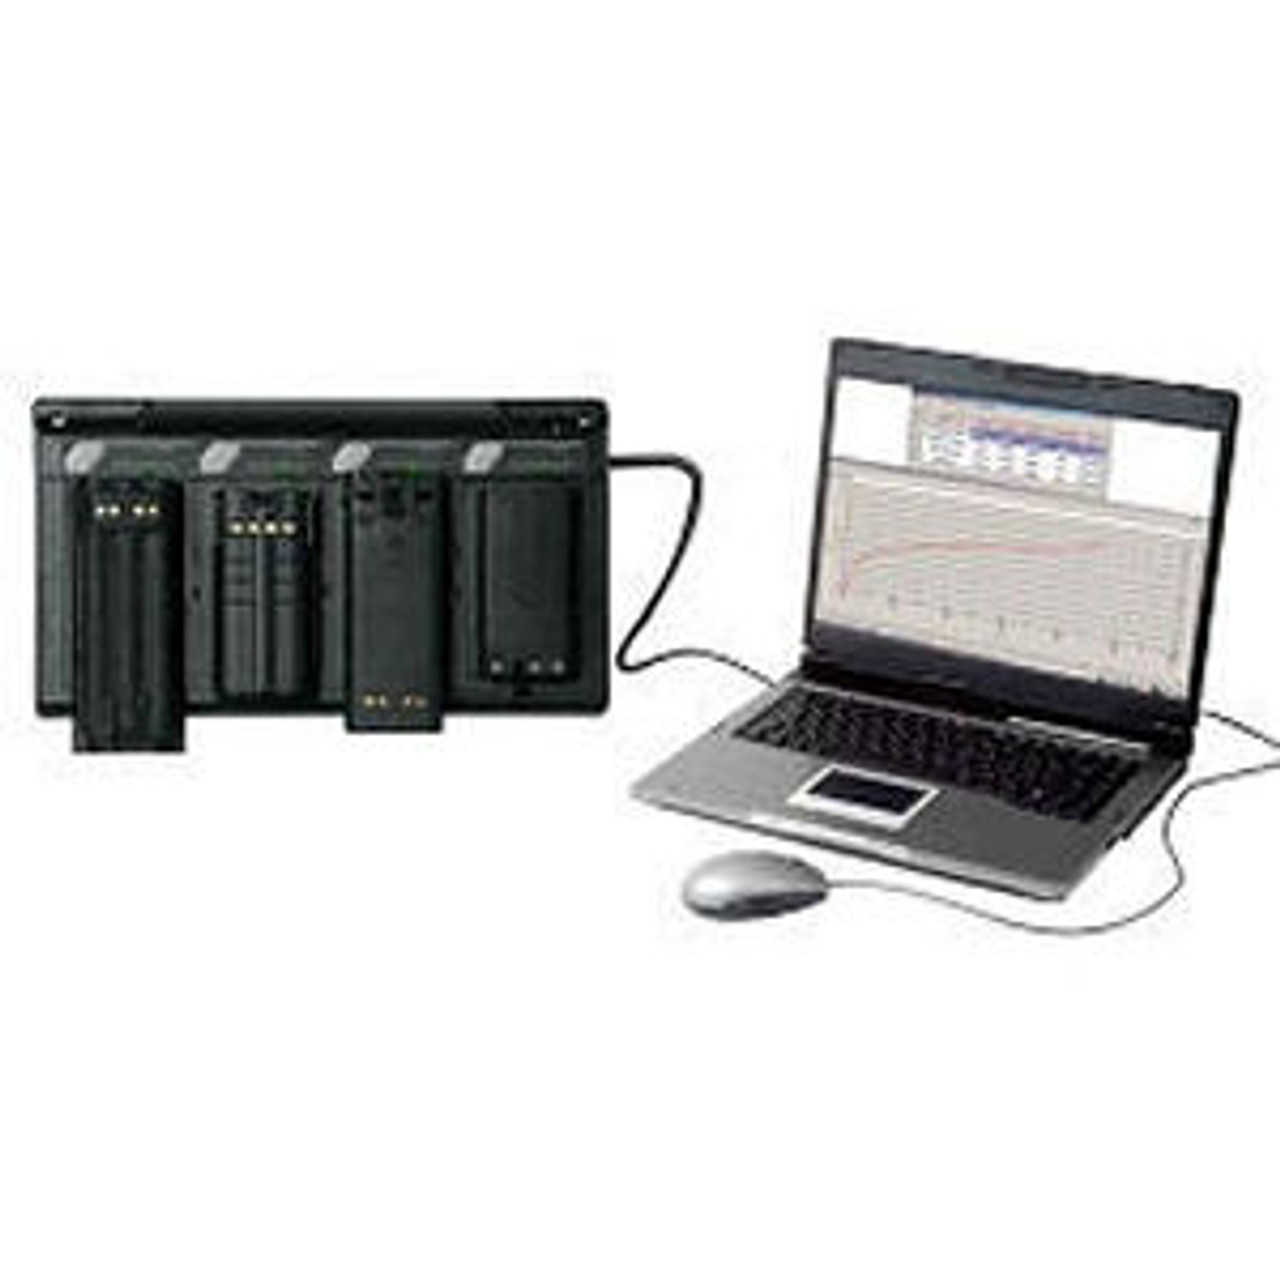 AdvanceTec 4-Slot Software Driven Monitoring System For ICOM IC-F30GT Batteries